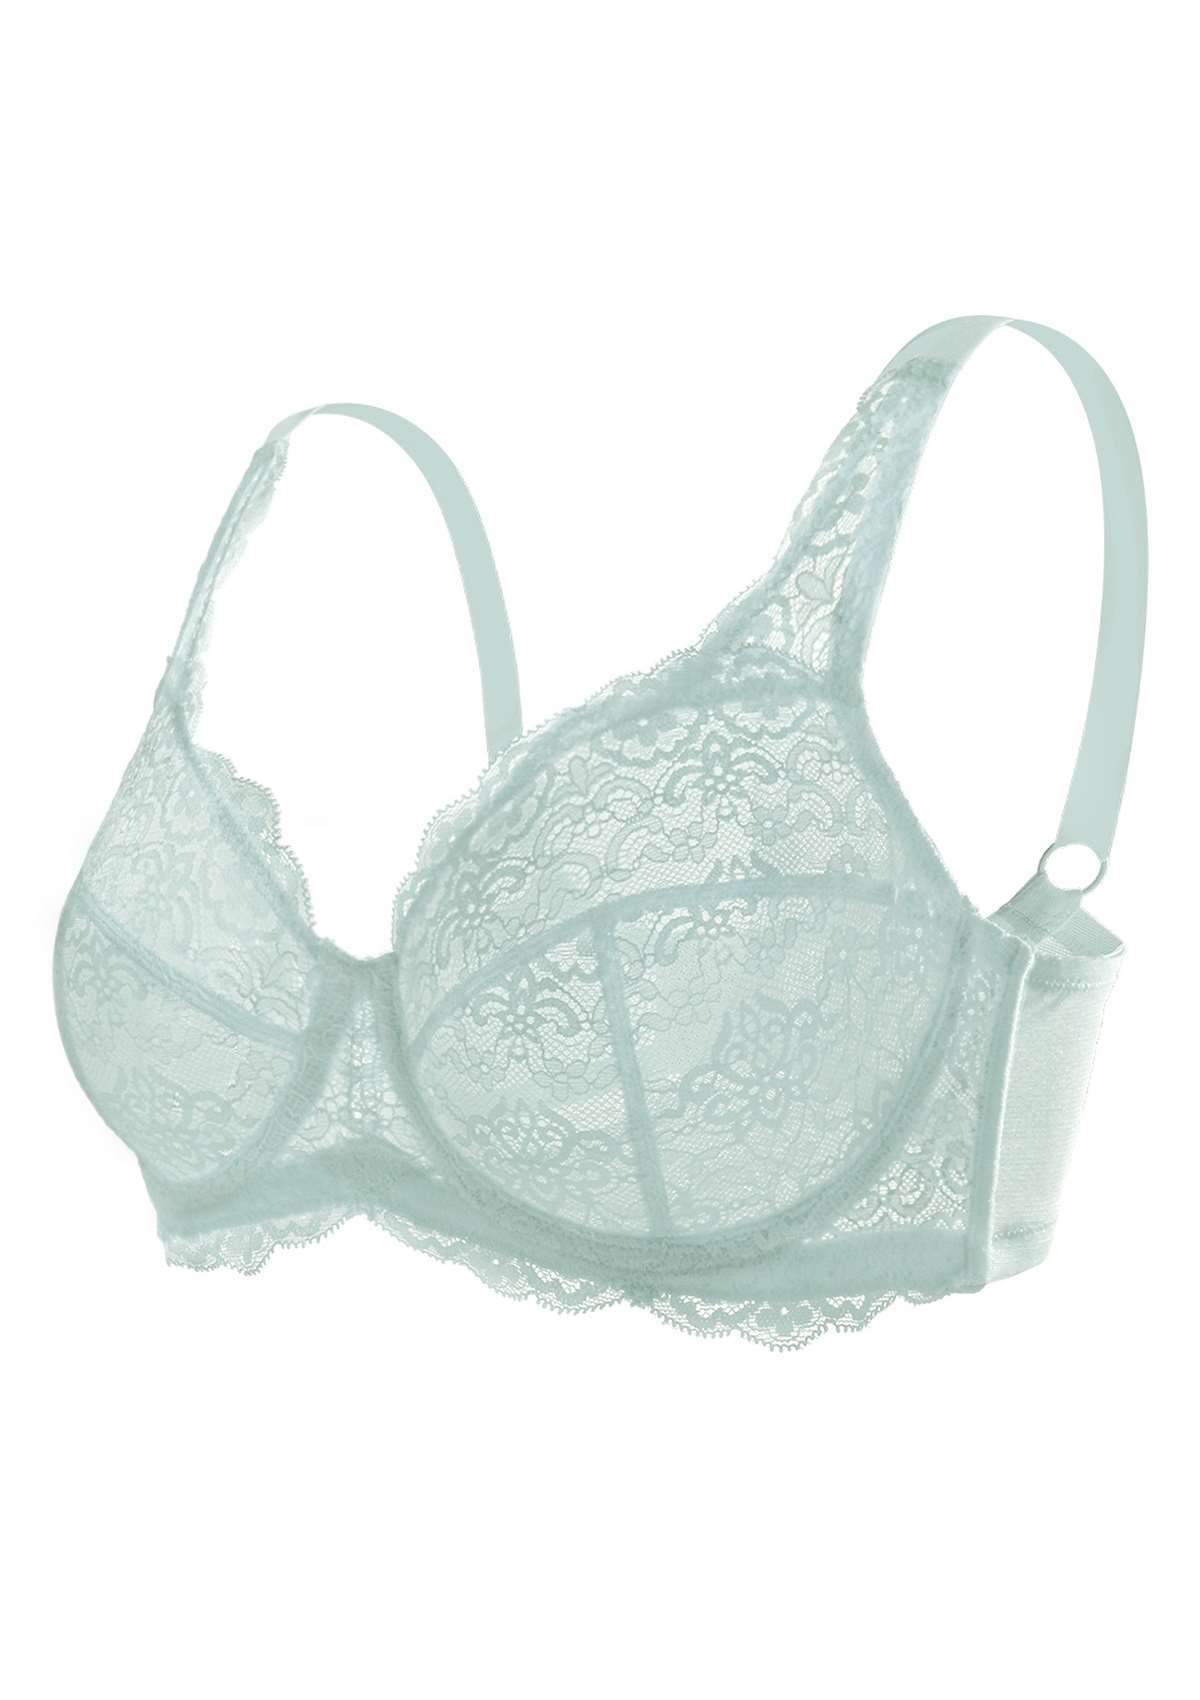 HSIA All-Over Floral Lace: Best Bra For Elderly With Sagging Breasts - Crystal Blue / 38 / C